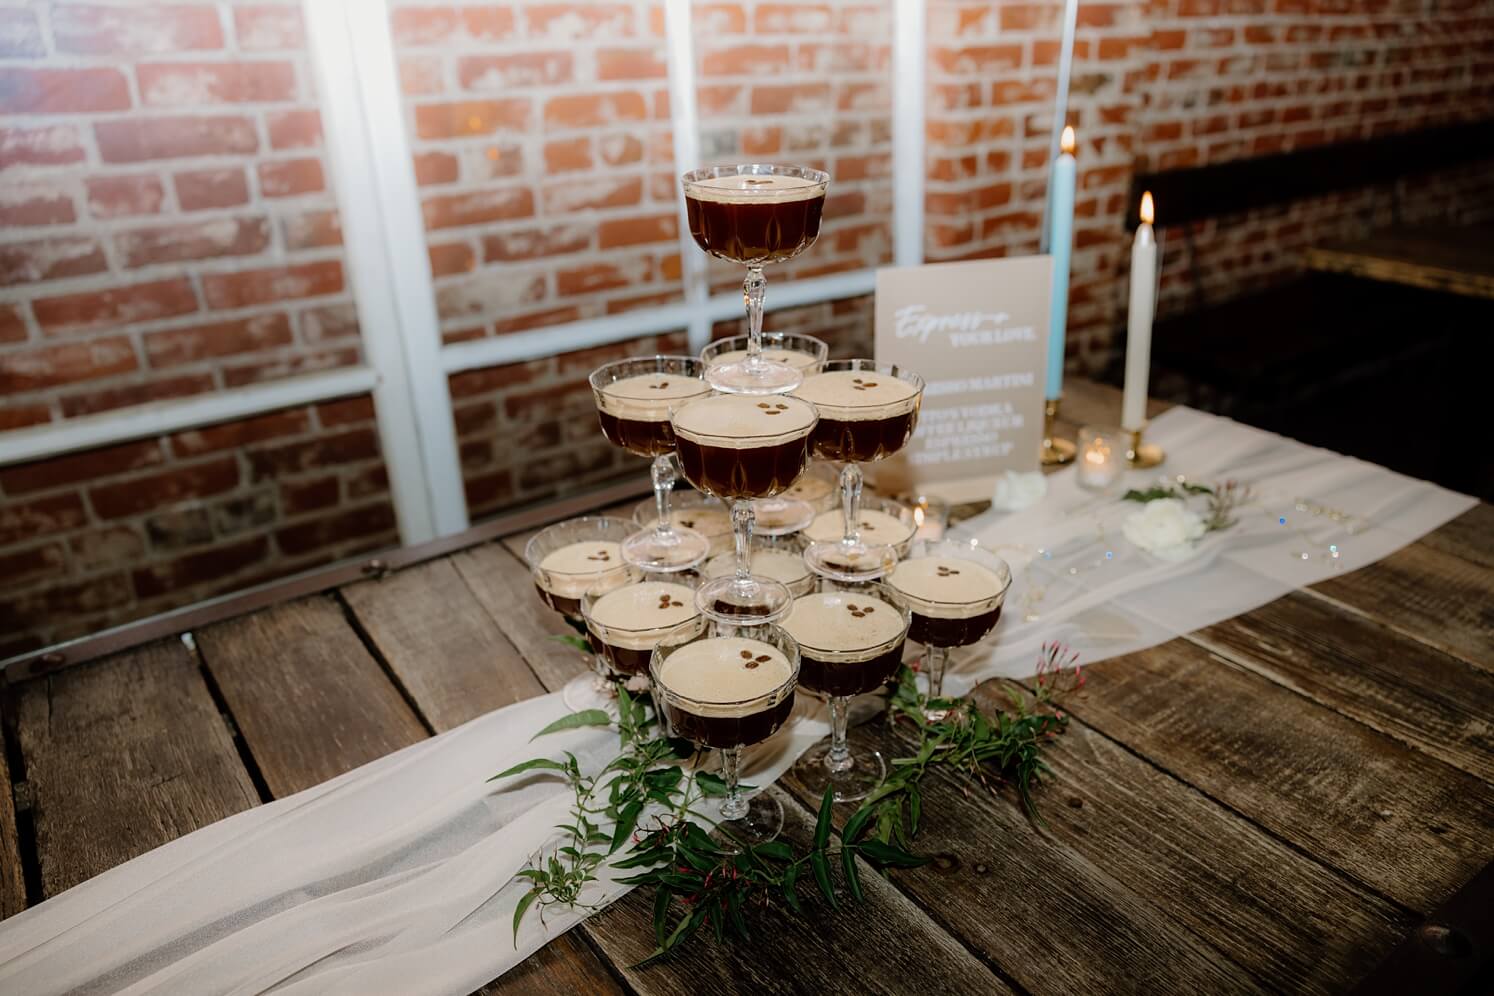 Espresso martini tower at Queensbury Rules Coffee House | McArthur Weddings and Events